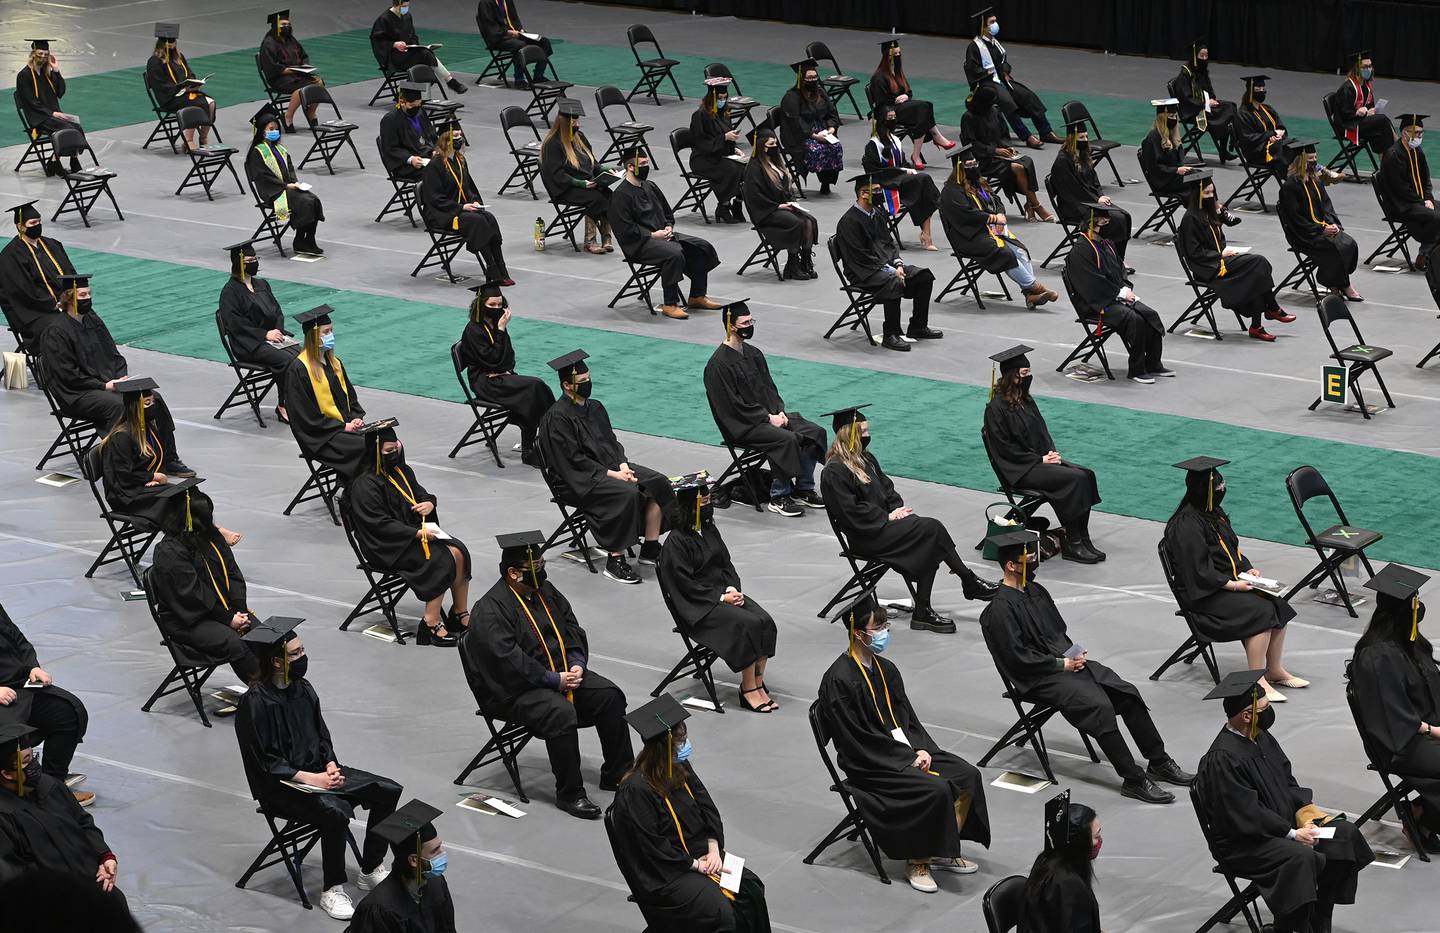 UAA Commencement 